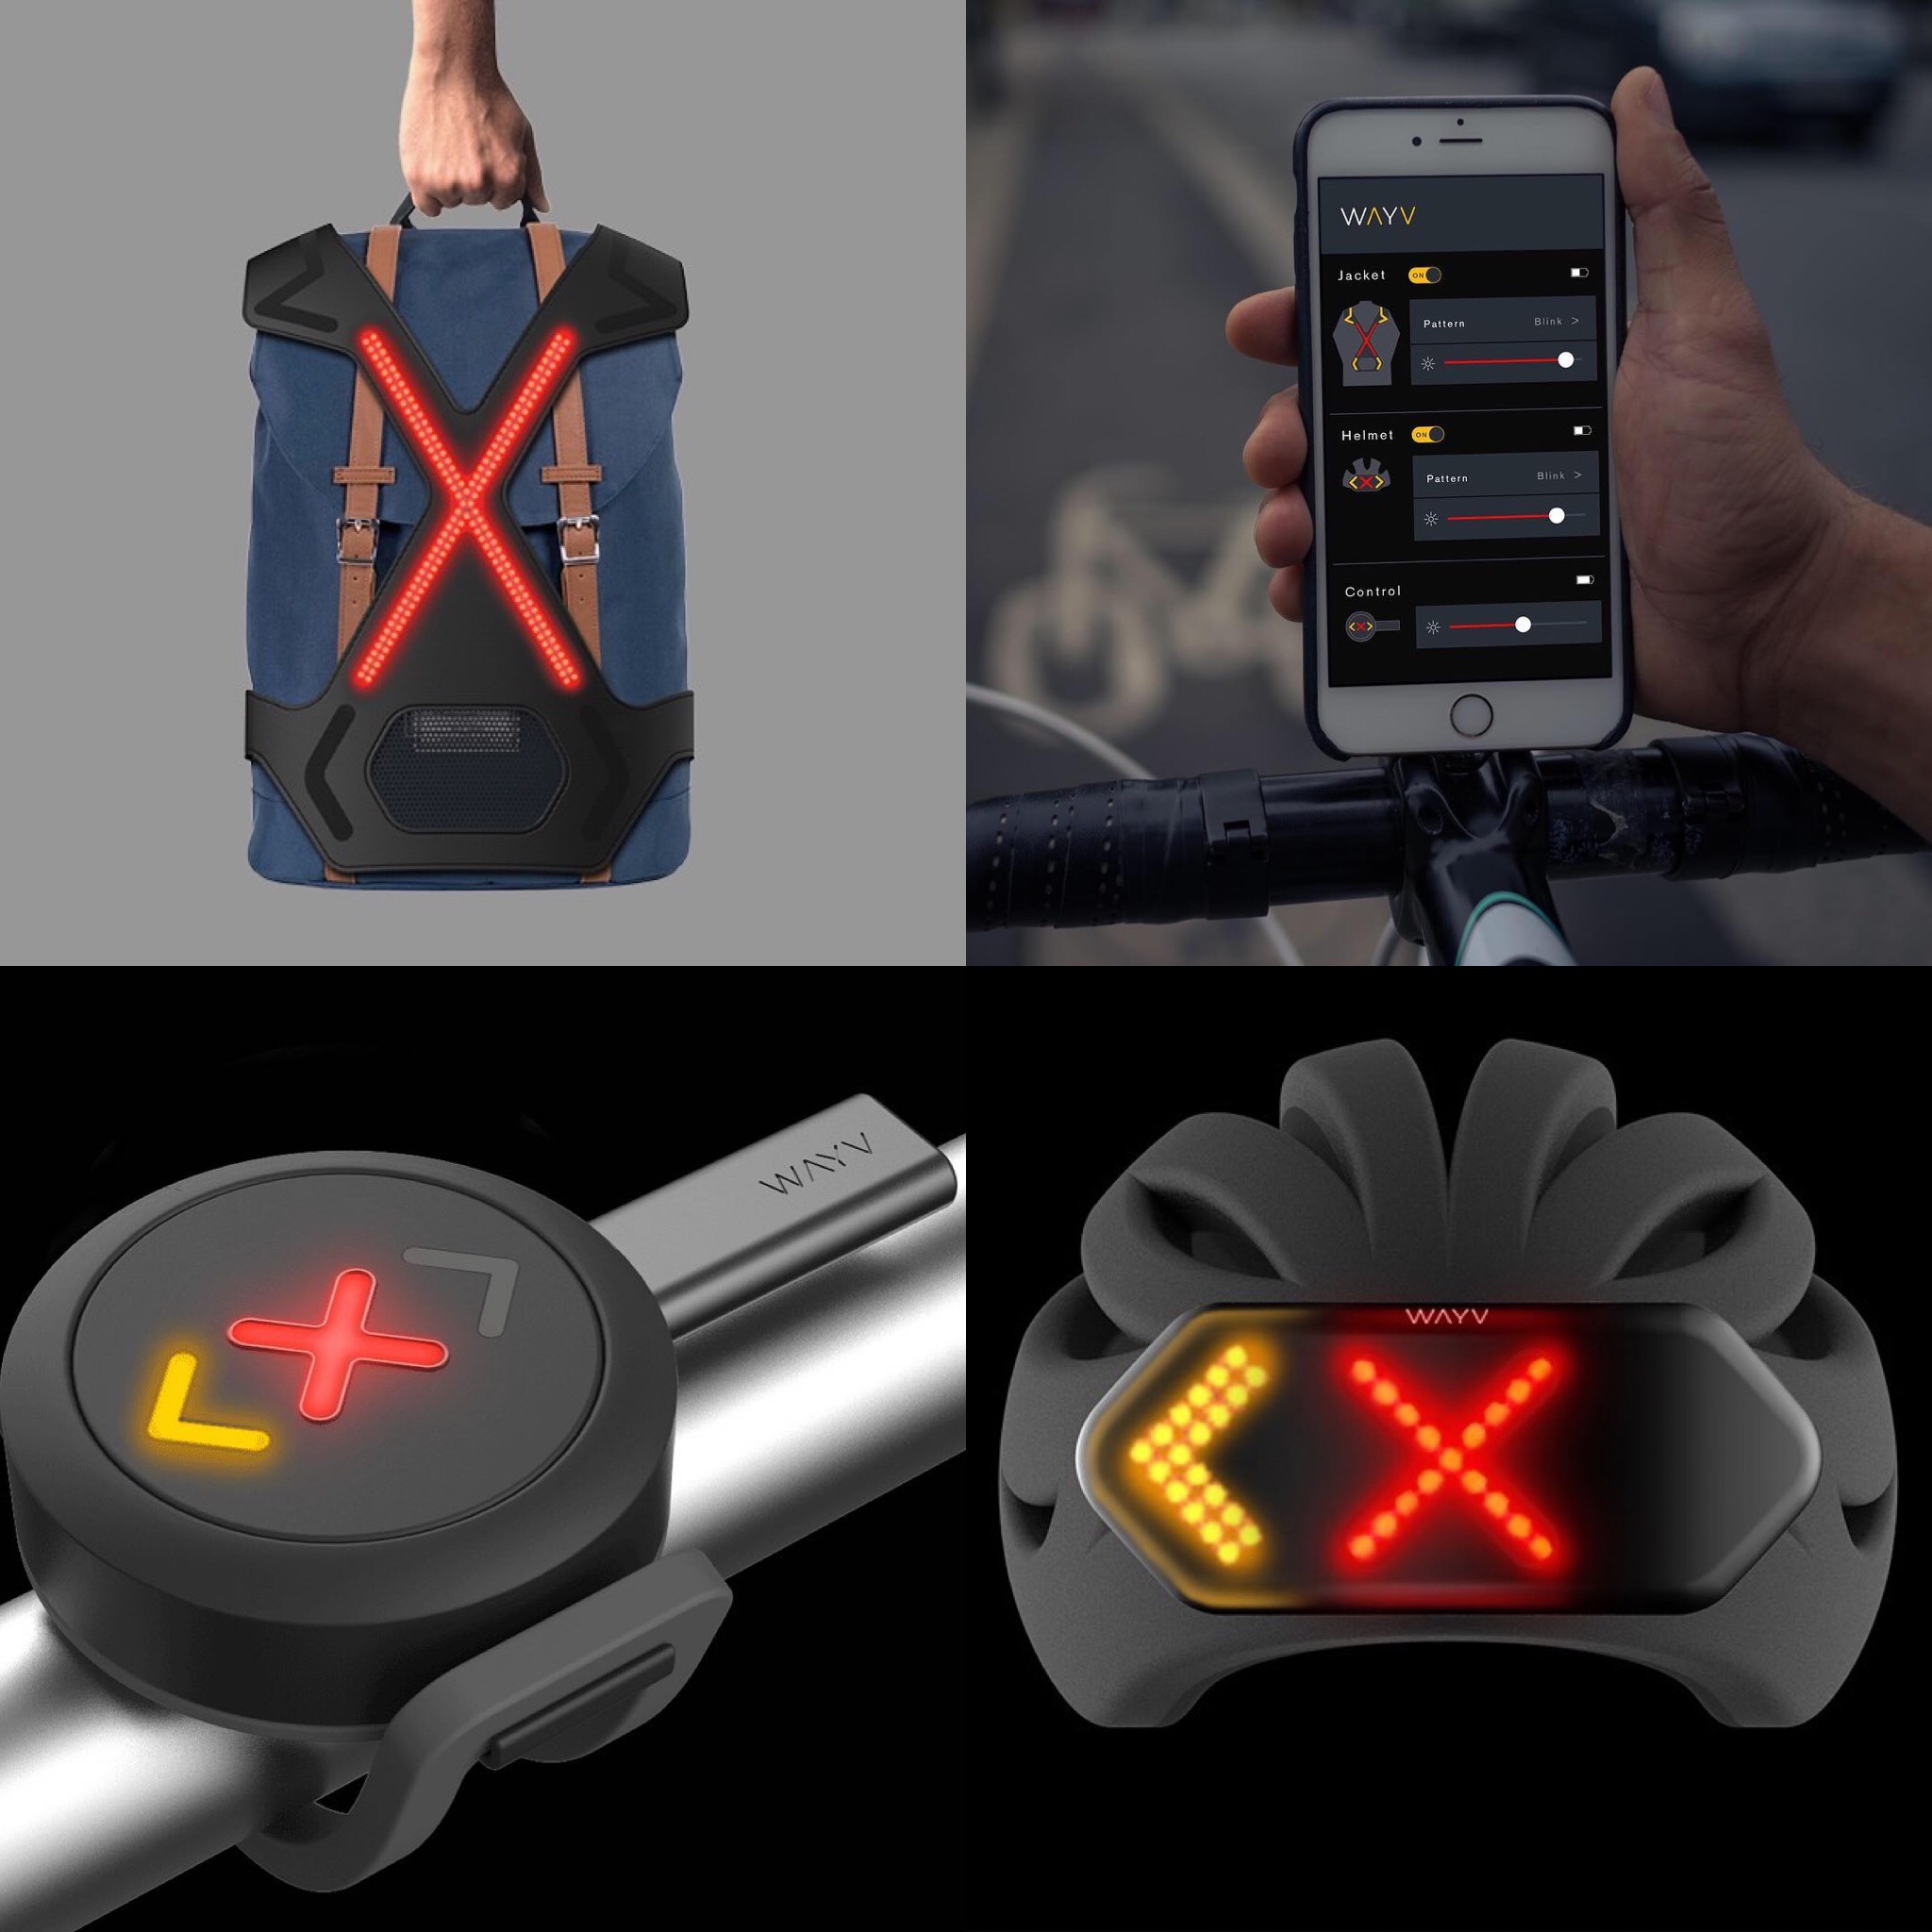 Signal from all angles with WAYV Smart turn signal vest and helmet headset